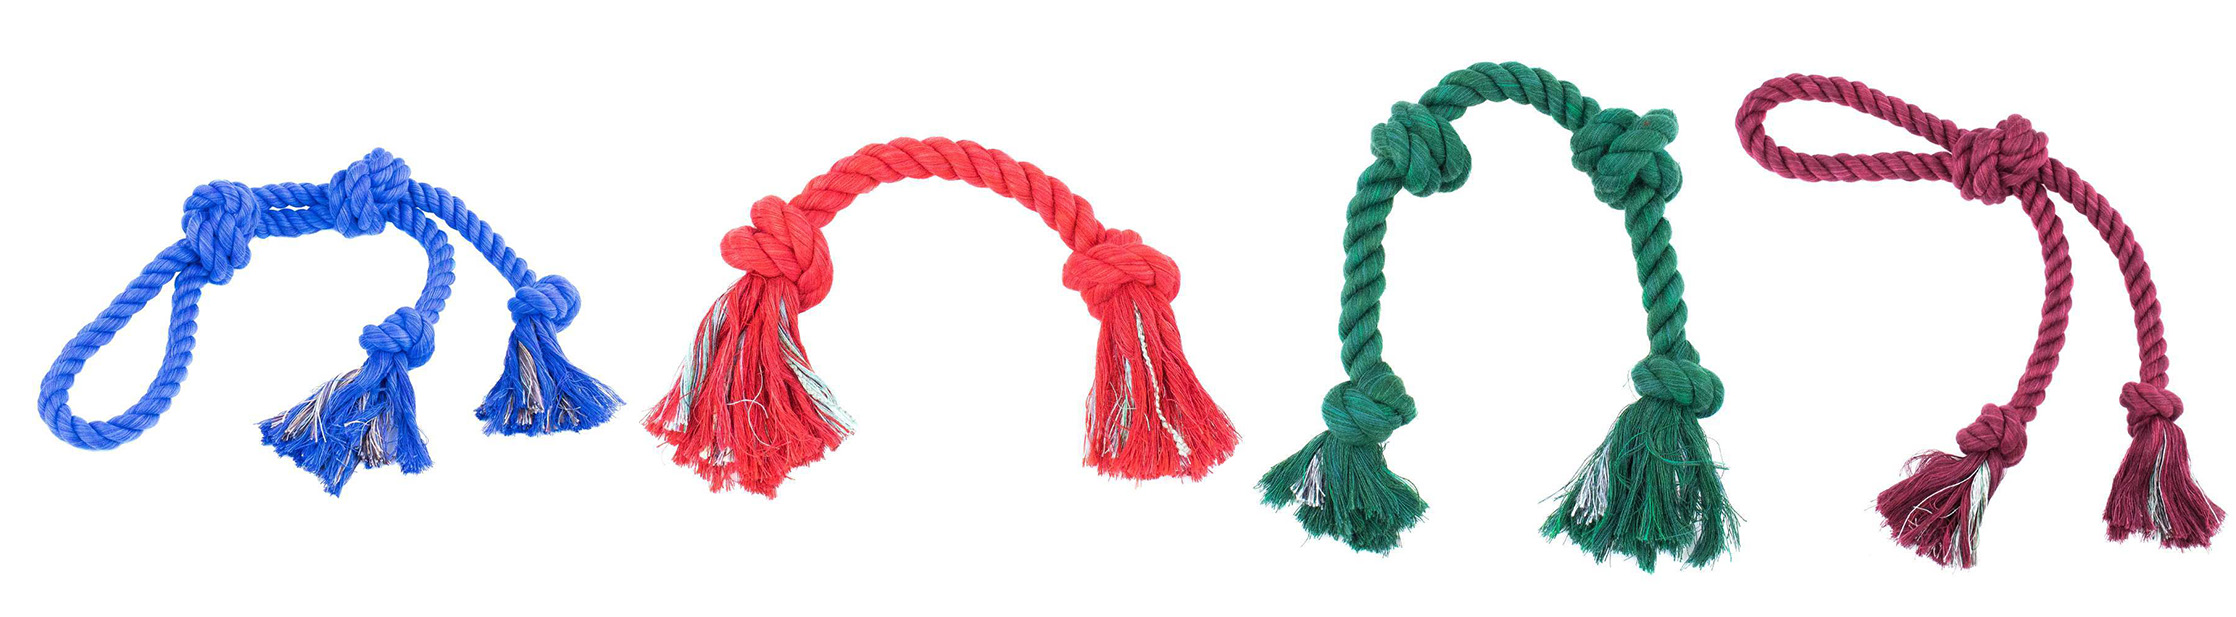 Knotted Rope Tug Toy for Pets